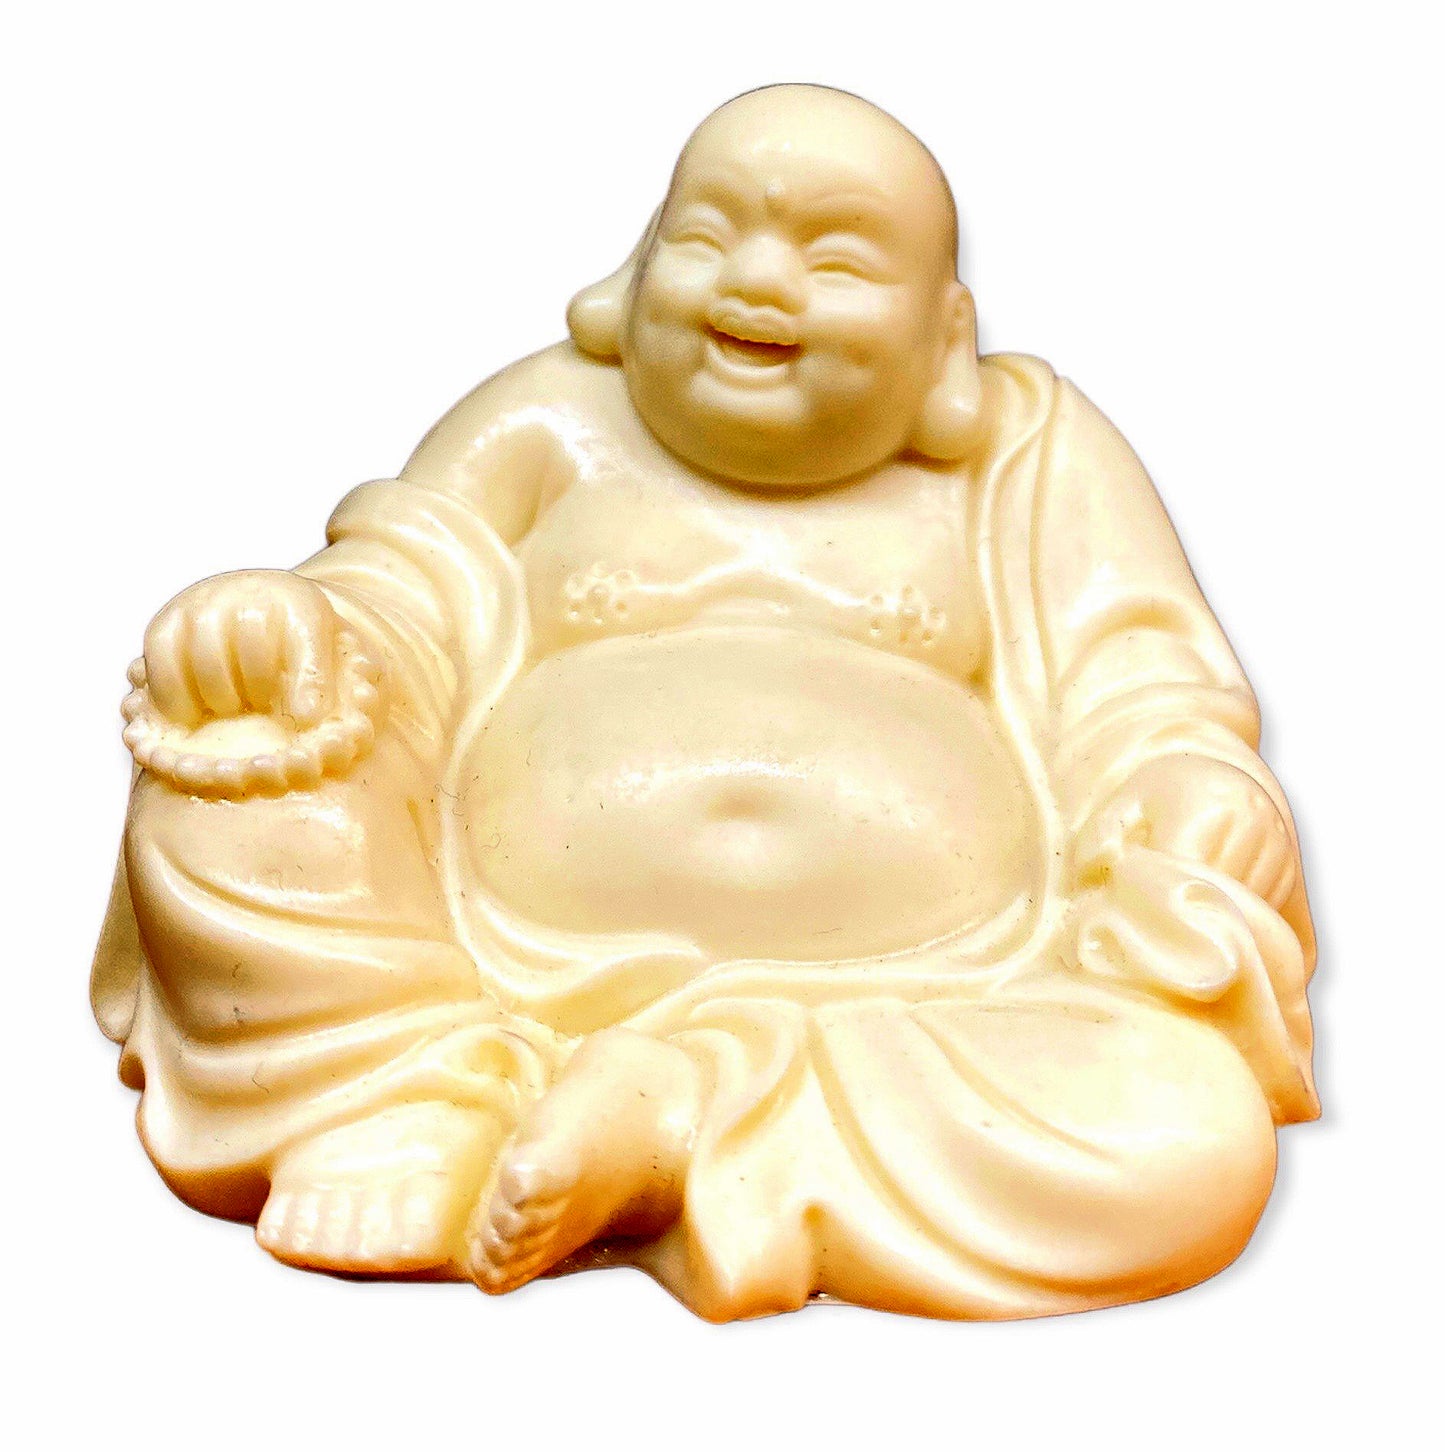 Sitting Fat Buddha Carved of Ivory Nut - 4 inch - 10cm - China - NEW1022